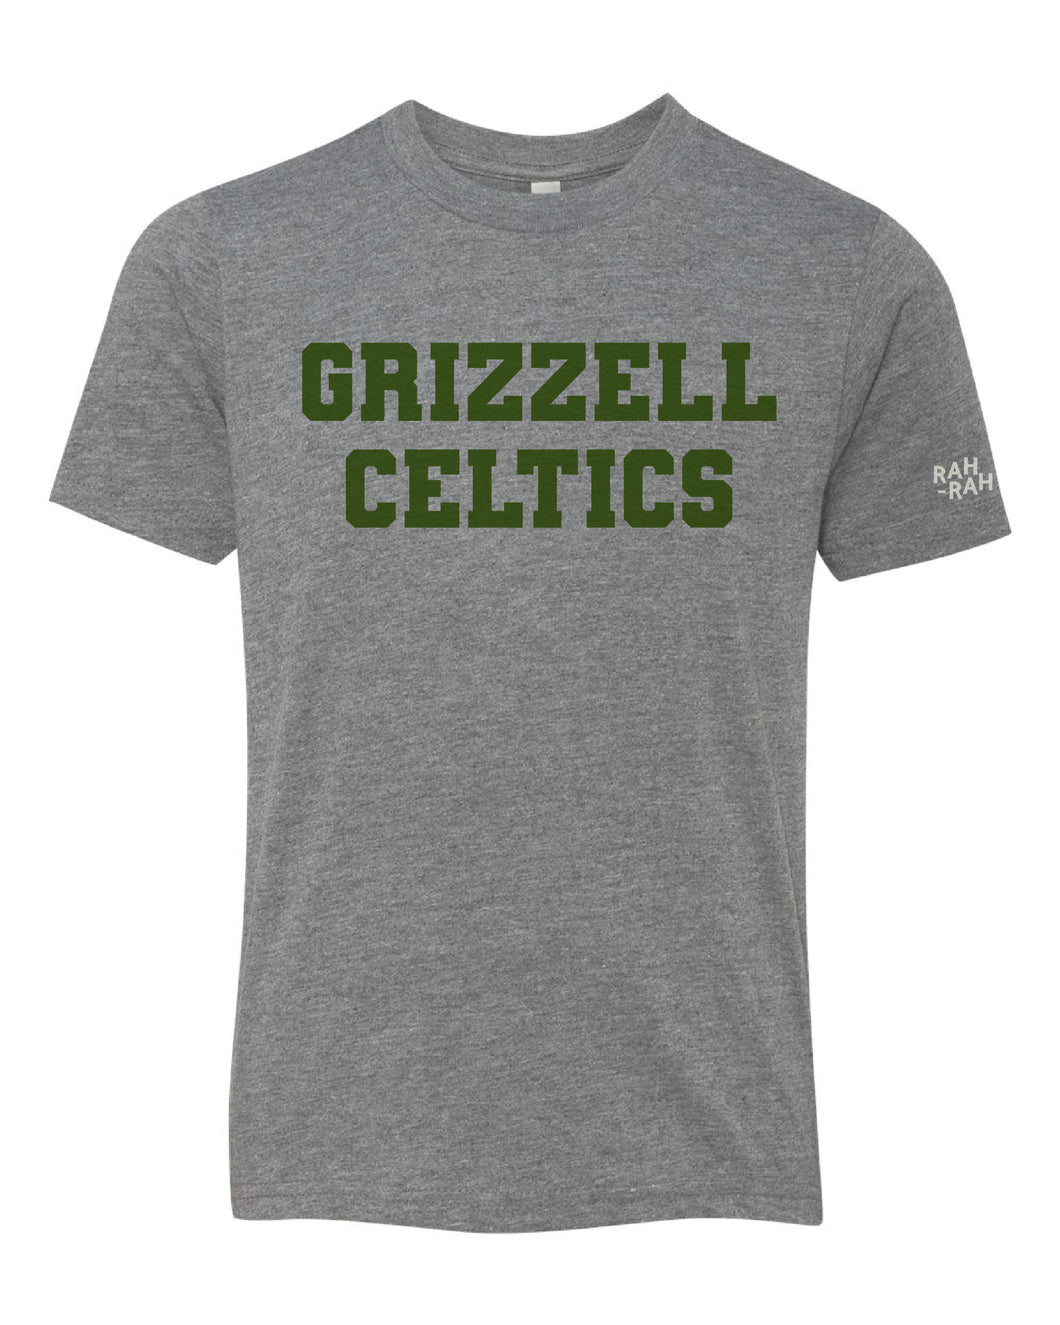 Grizzell Celtics Block Grey Tee | YOUTH